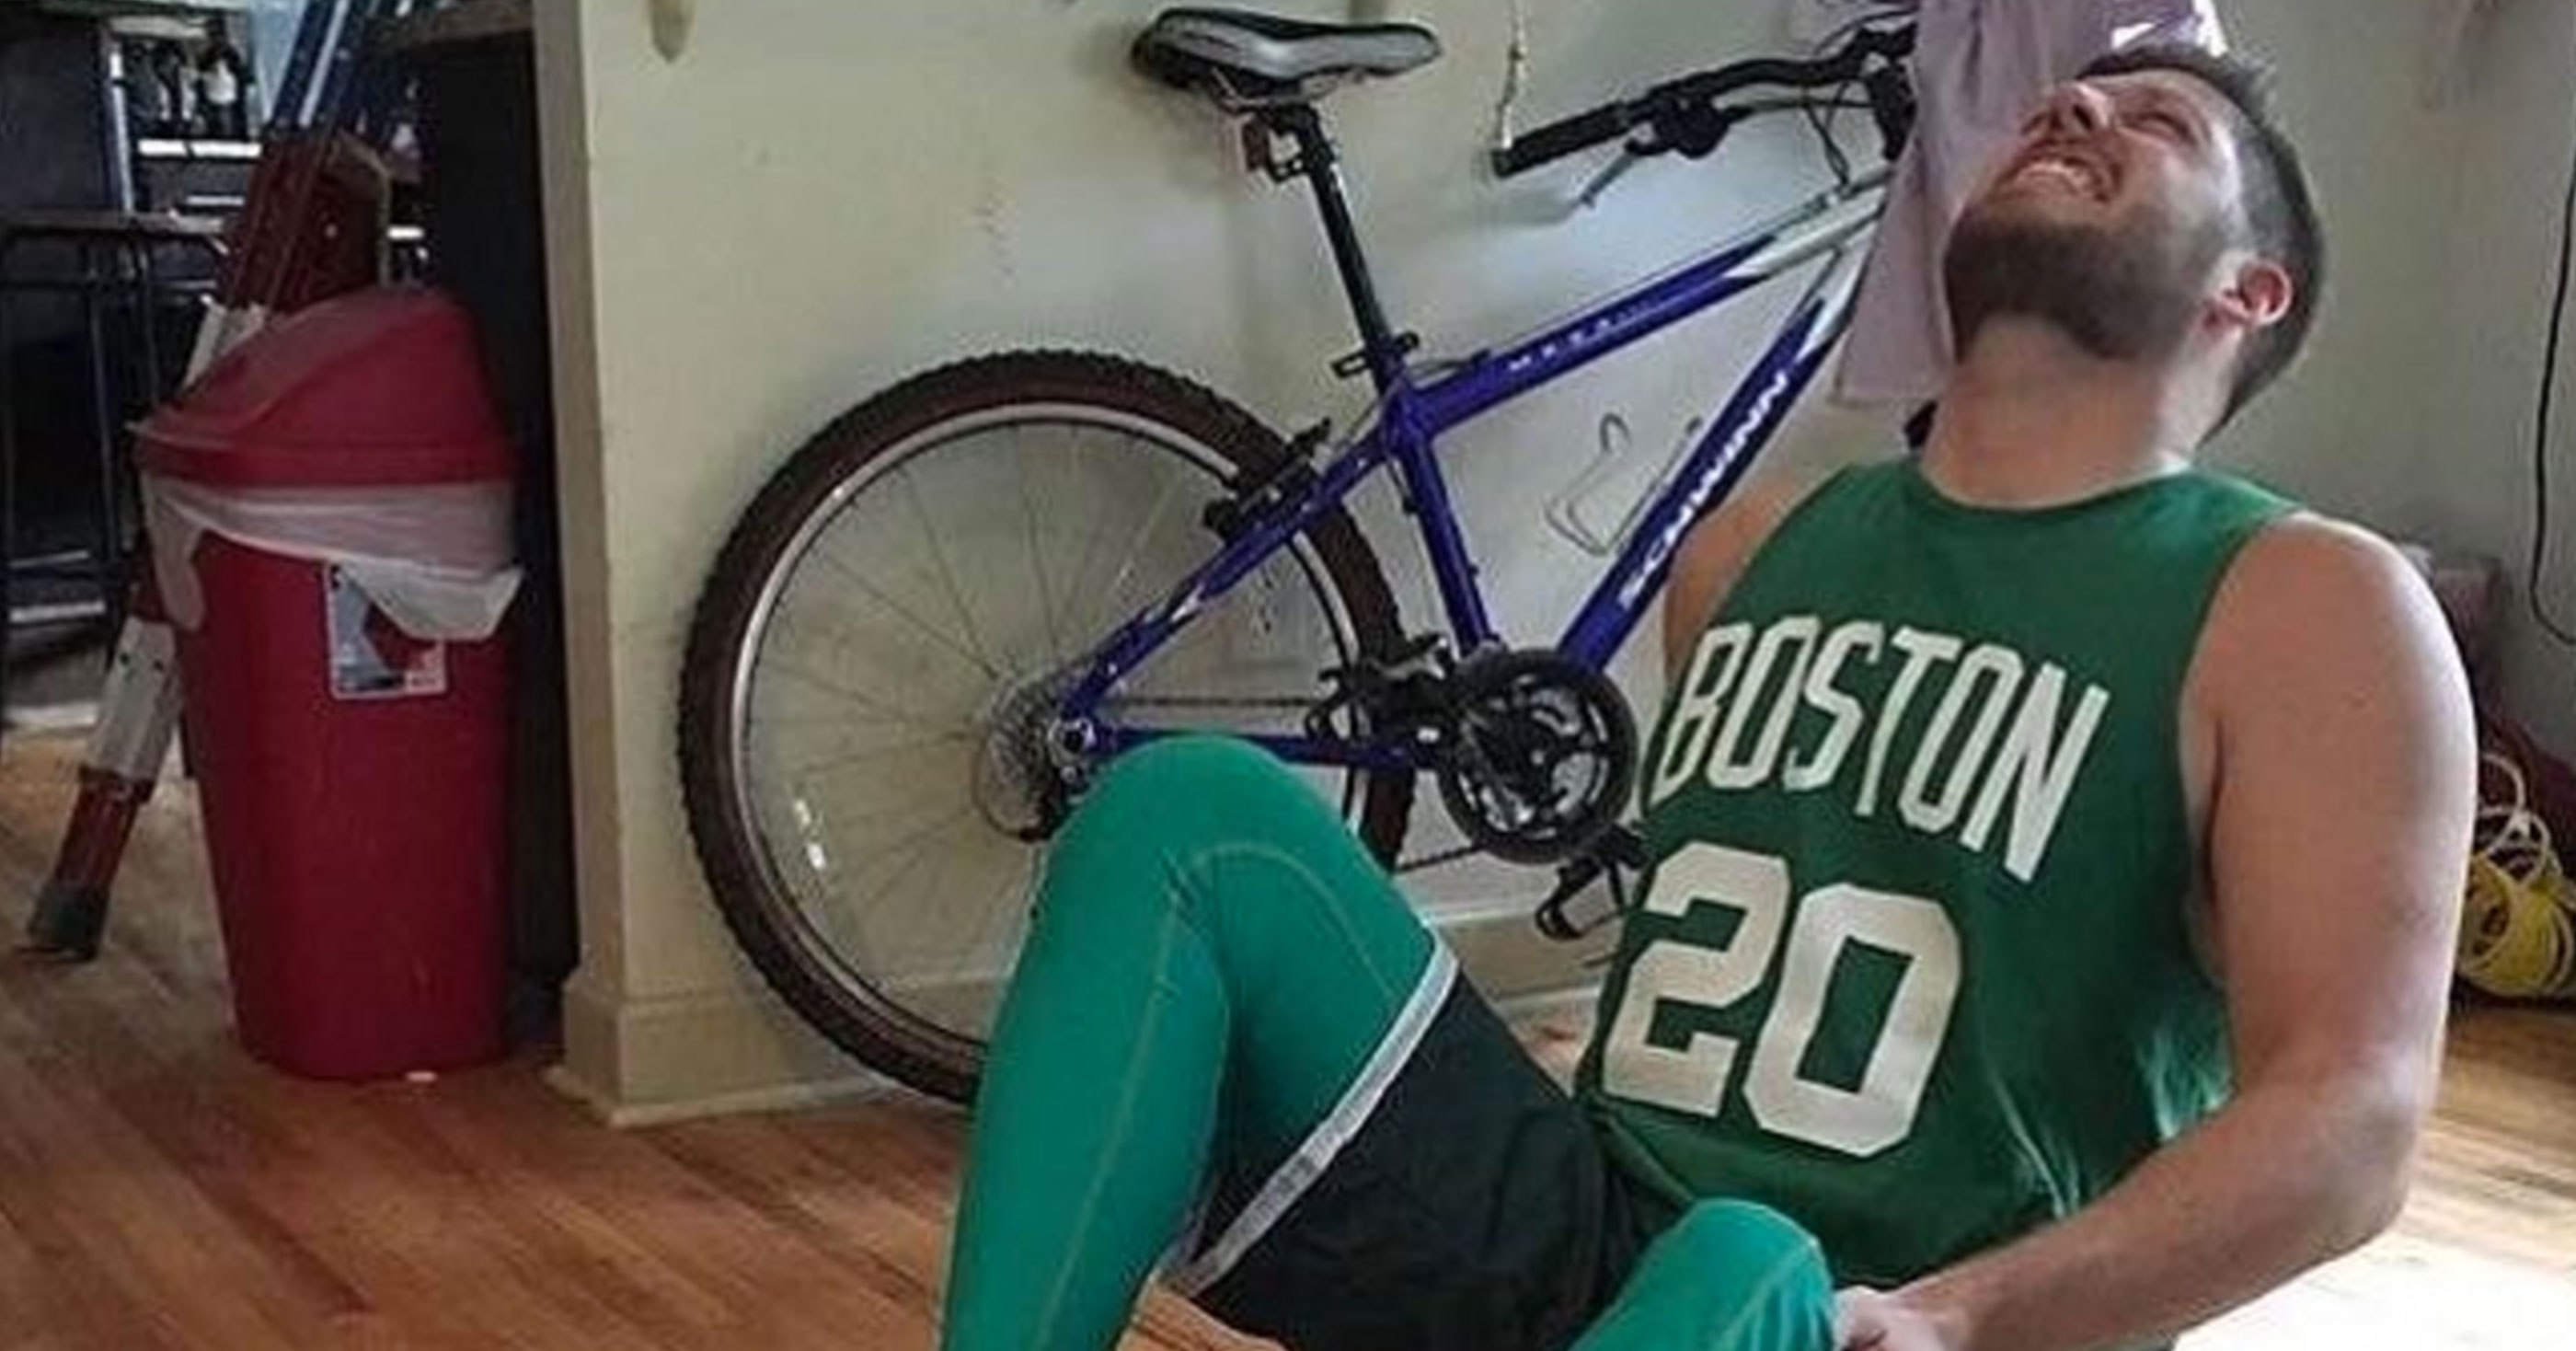 Man Lost His Leg To Cancer, So He Went As Gordon Hayward For Halloween (PIC)2800 x 1468